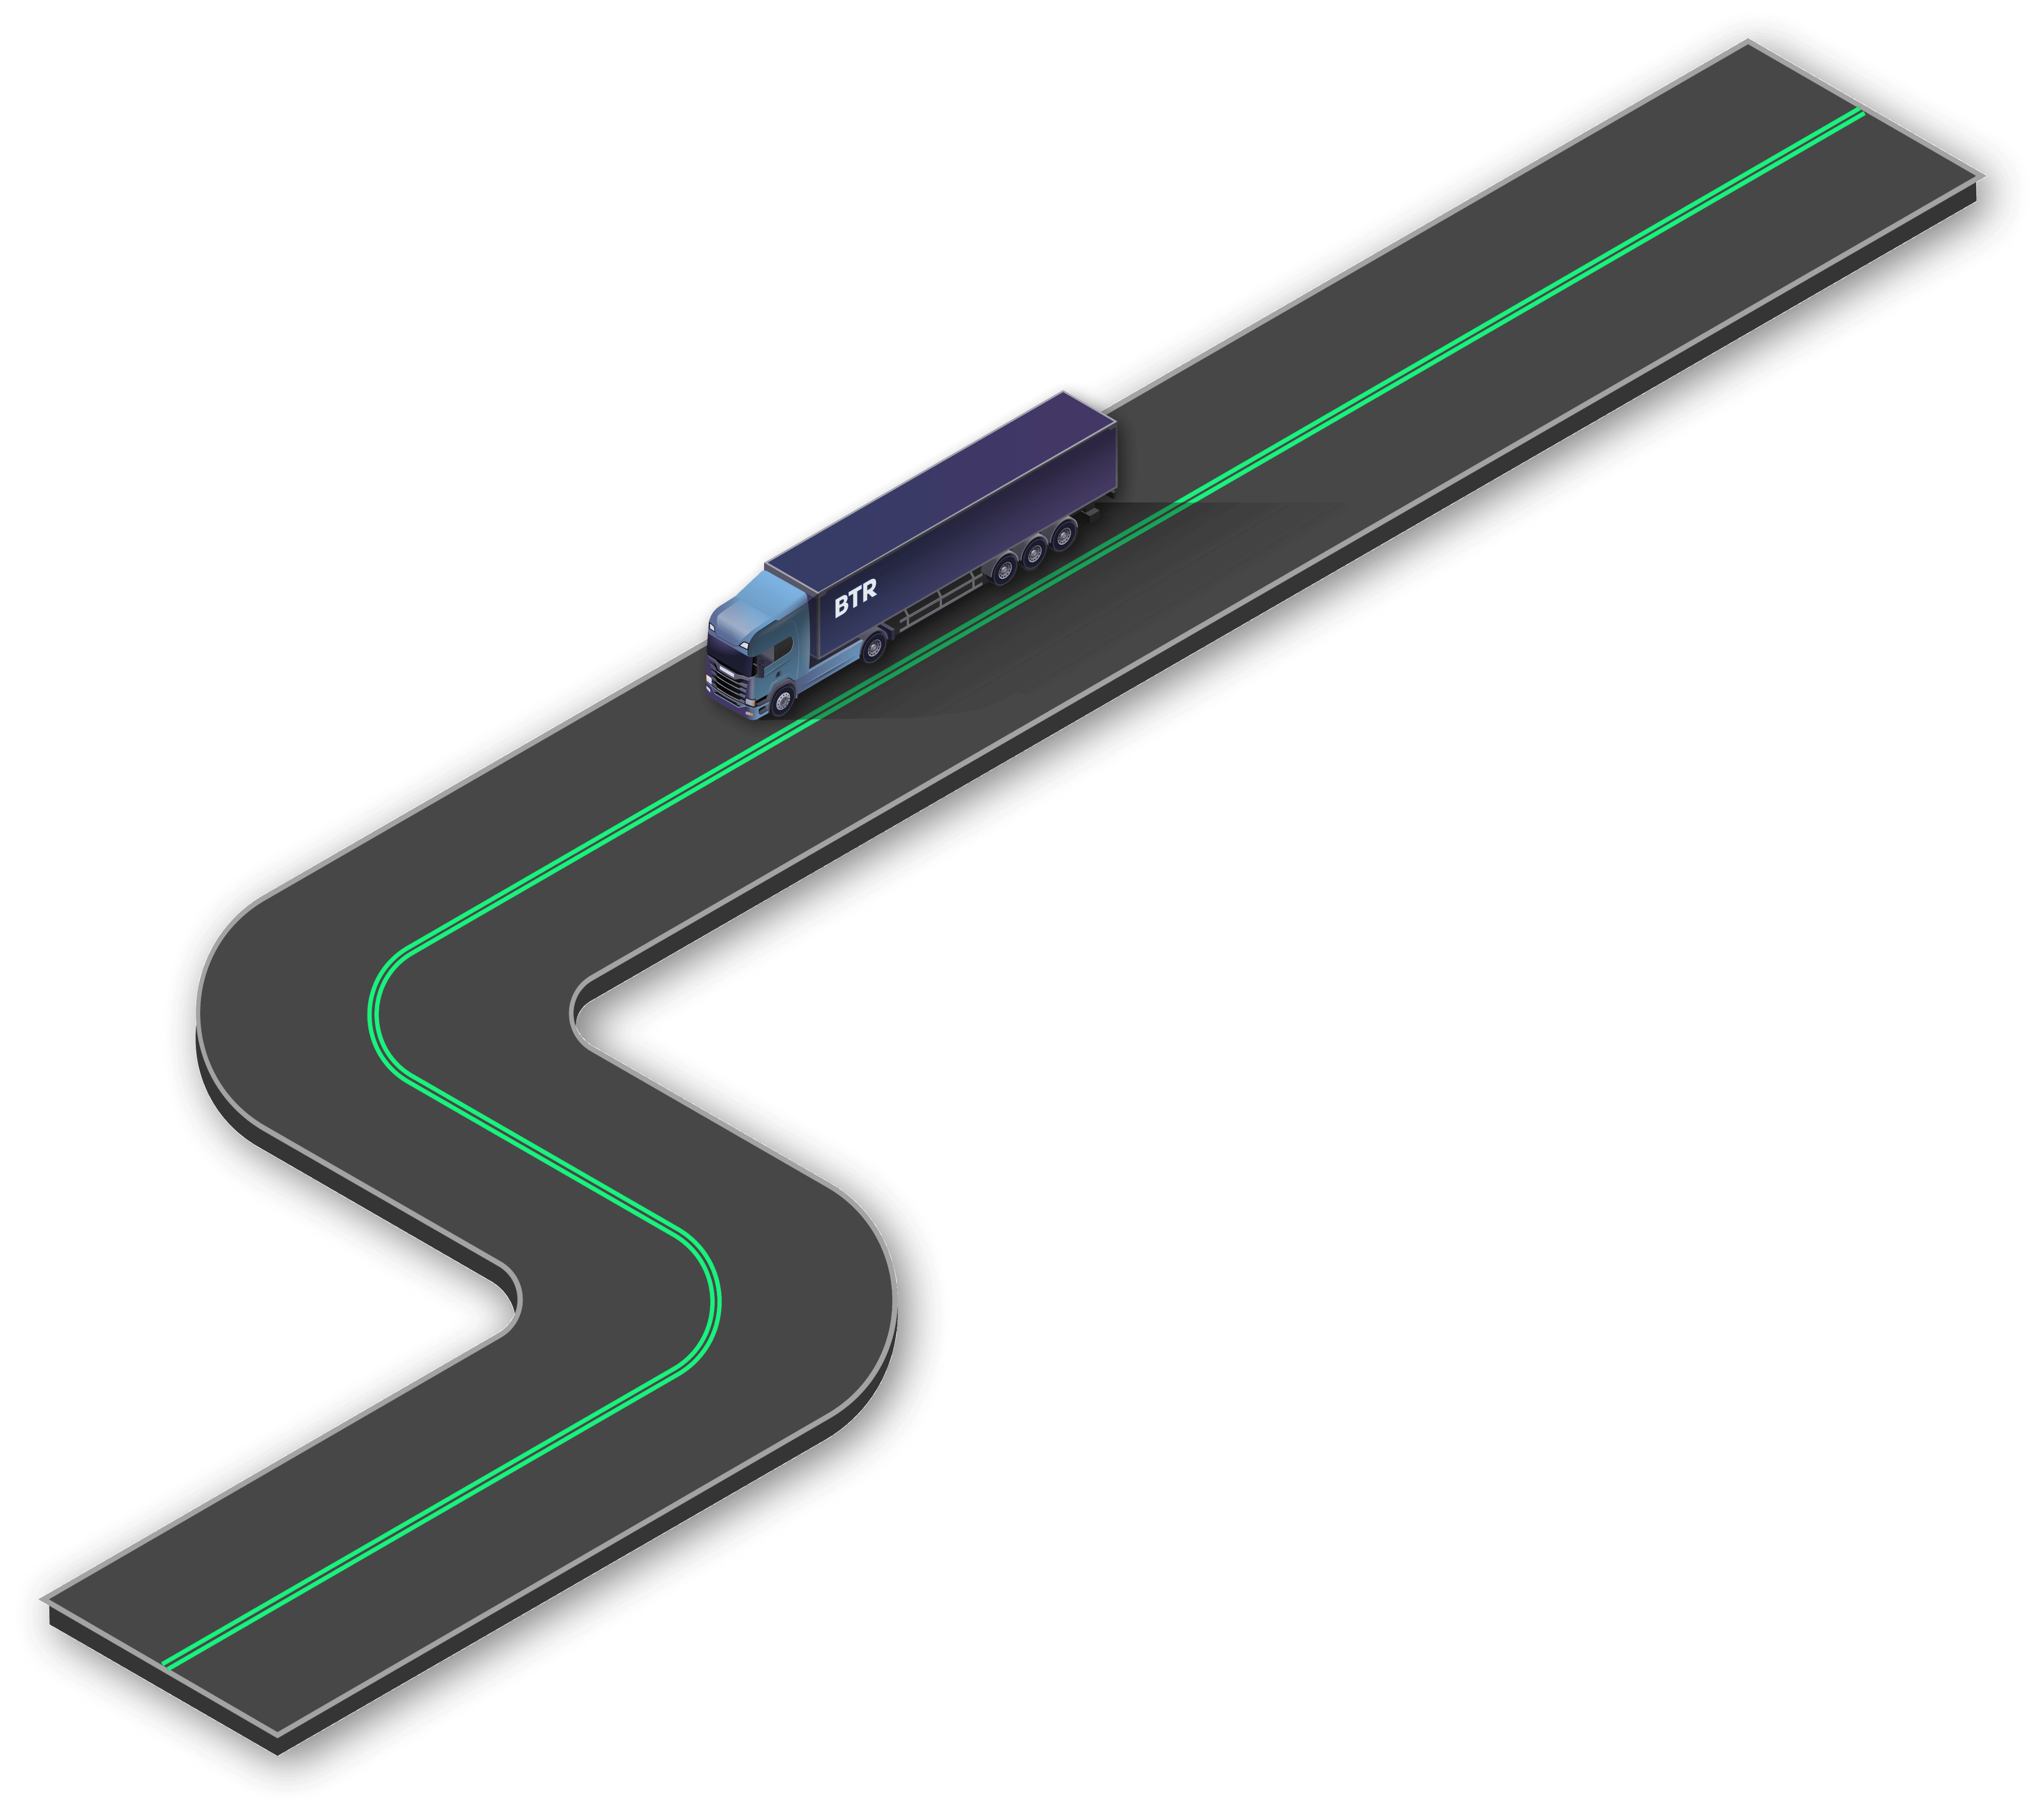 Isometric illustration of a BTR curtainsider semi trailer on a highway